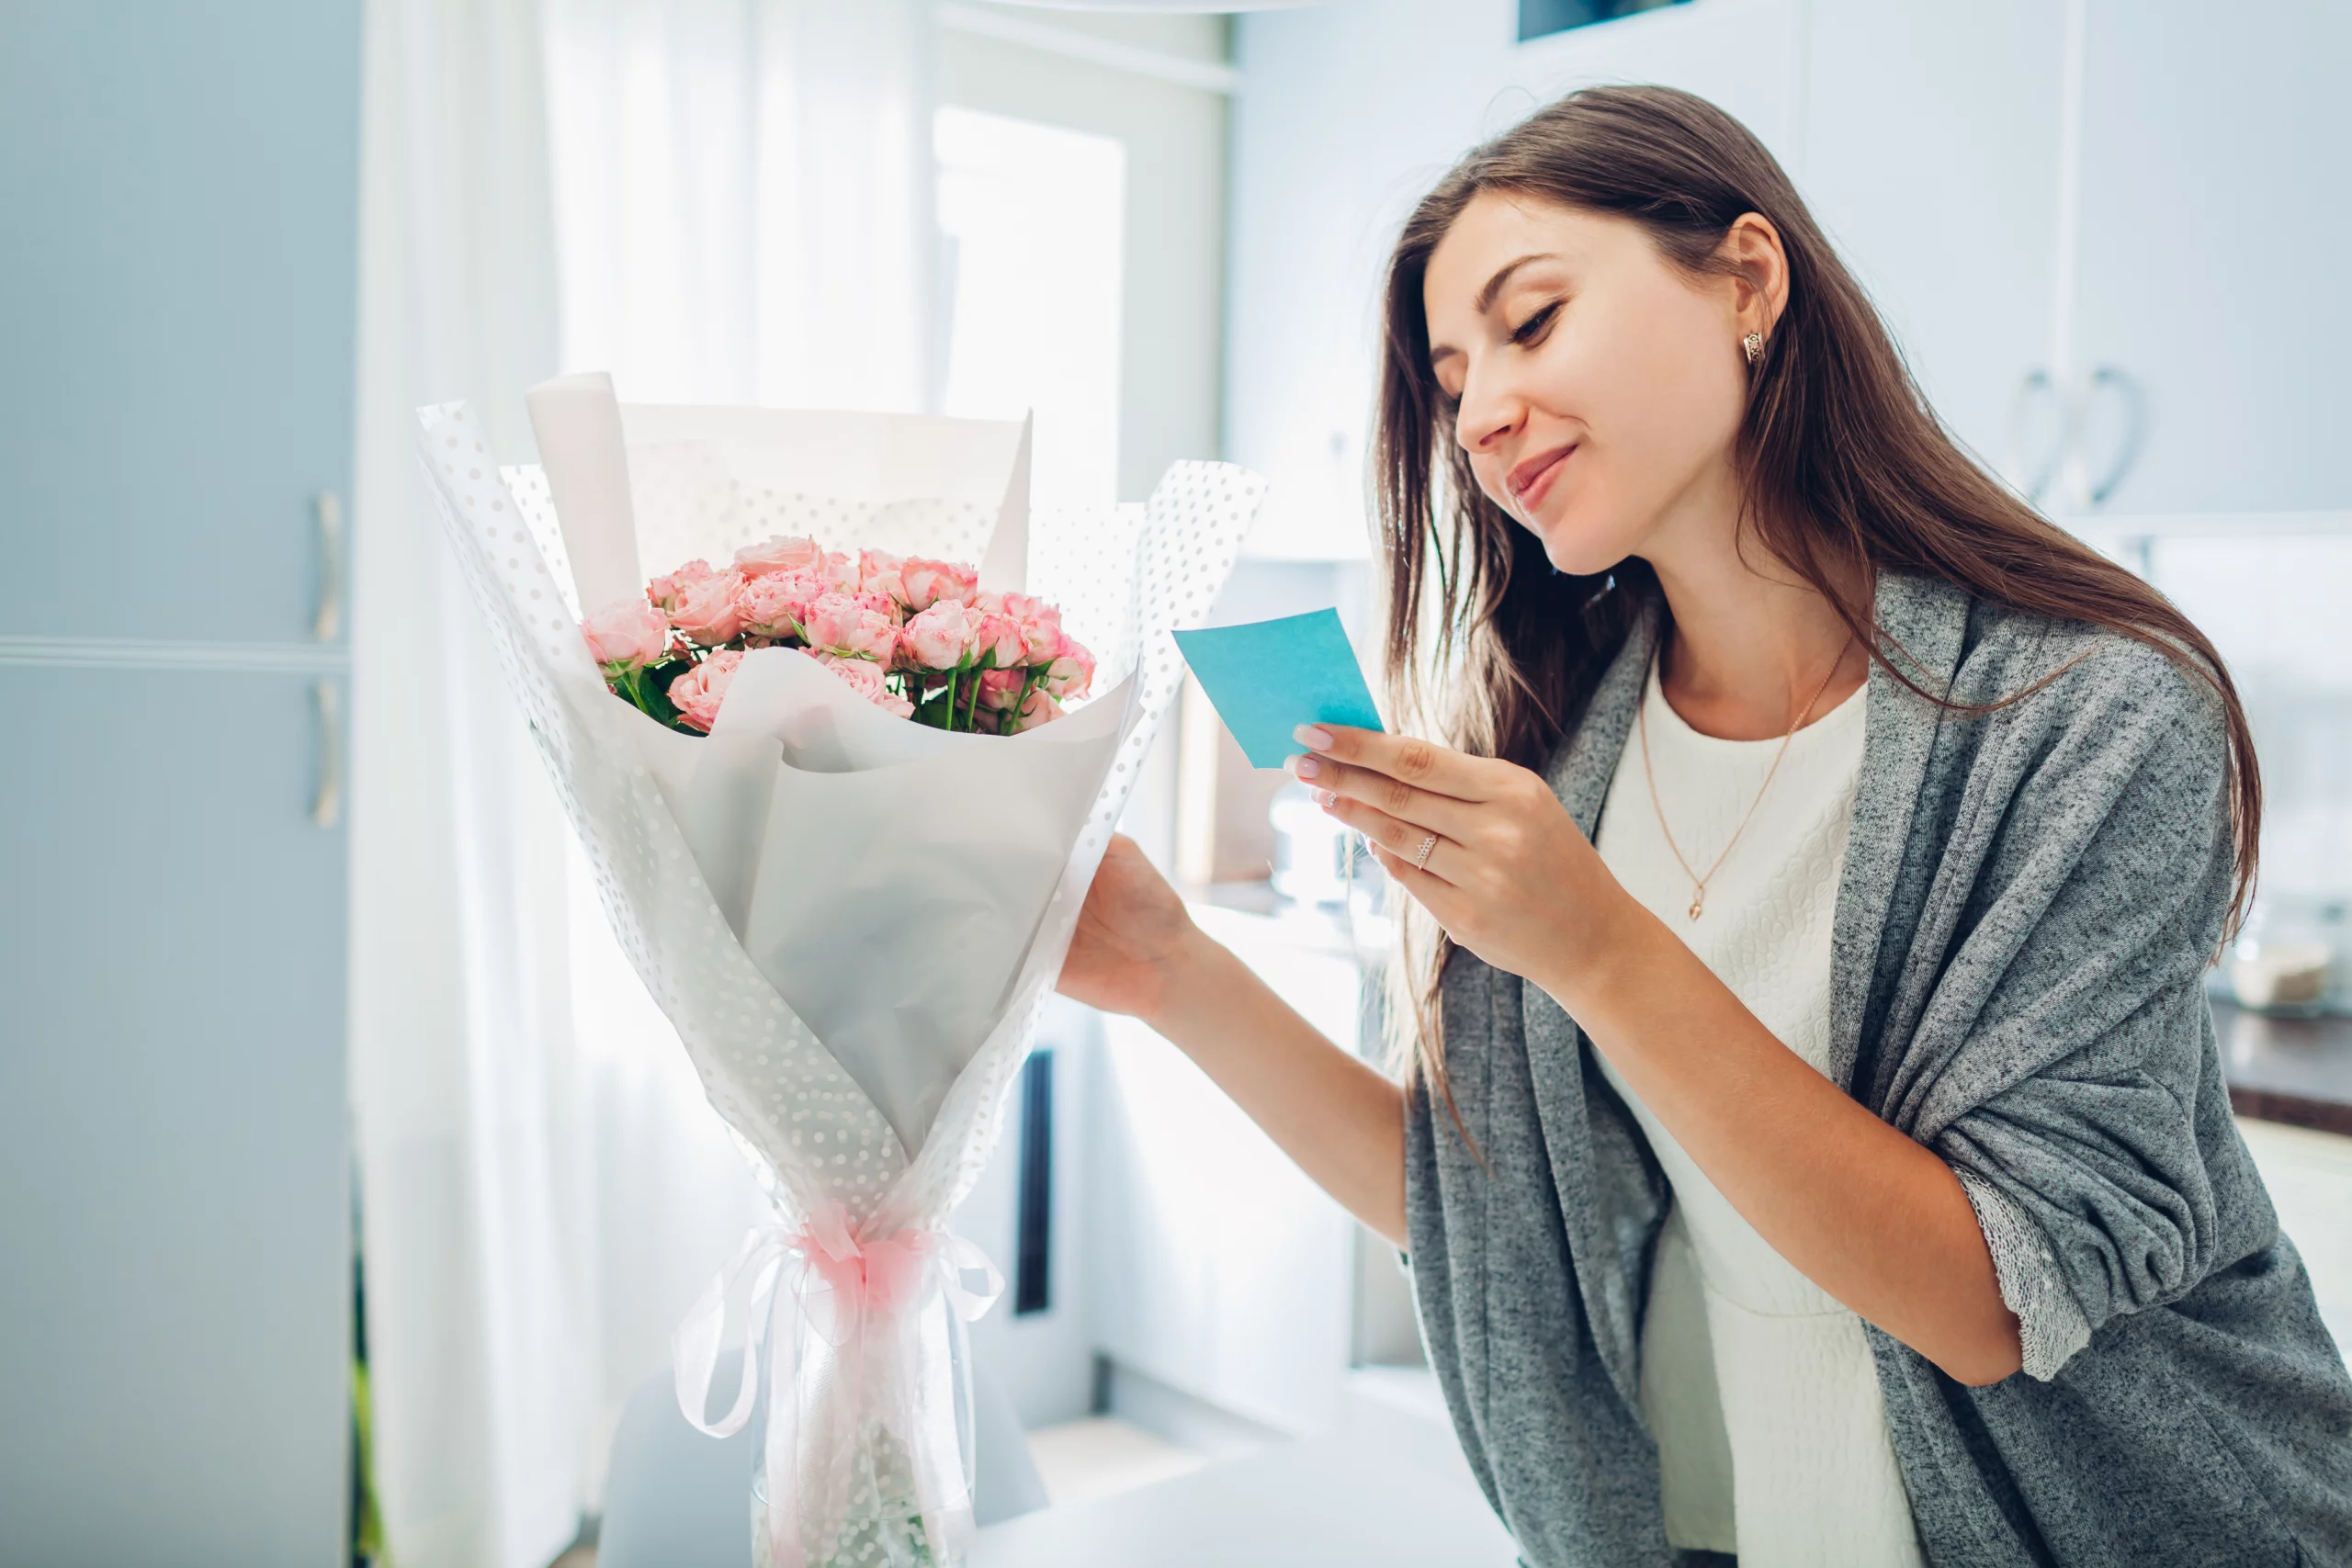 customize flower delivery - https://beato.com.sg/